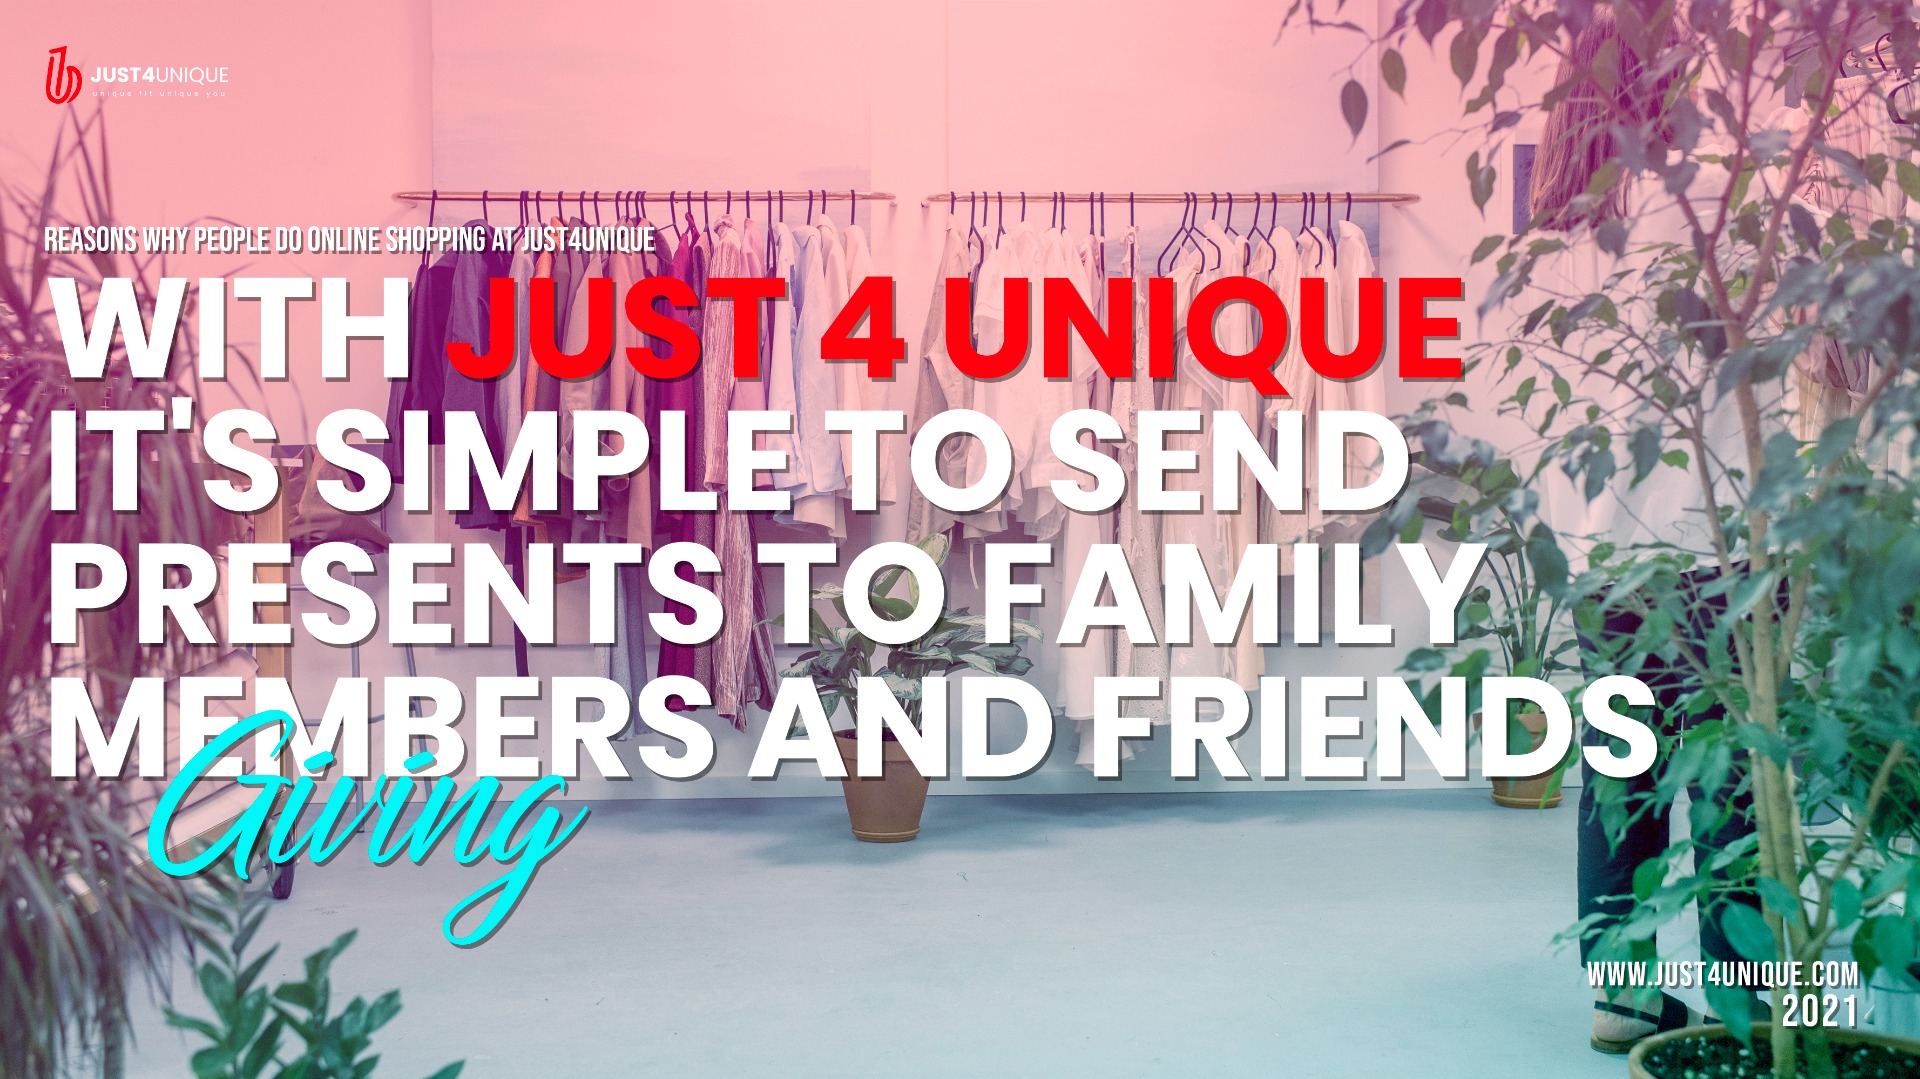 With Just4unique It's Simple to Send Presents to Family Members and Friends